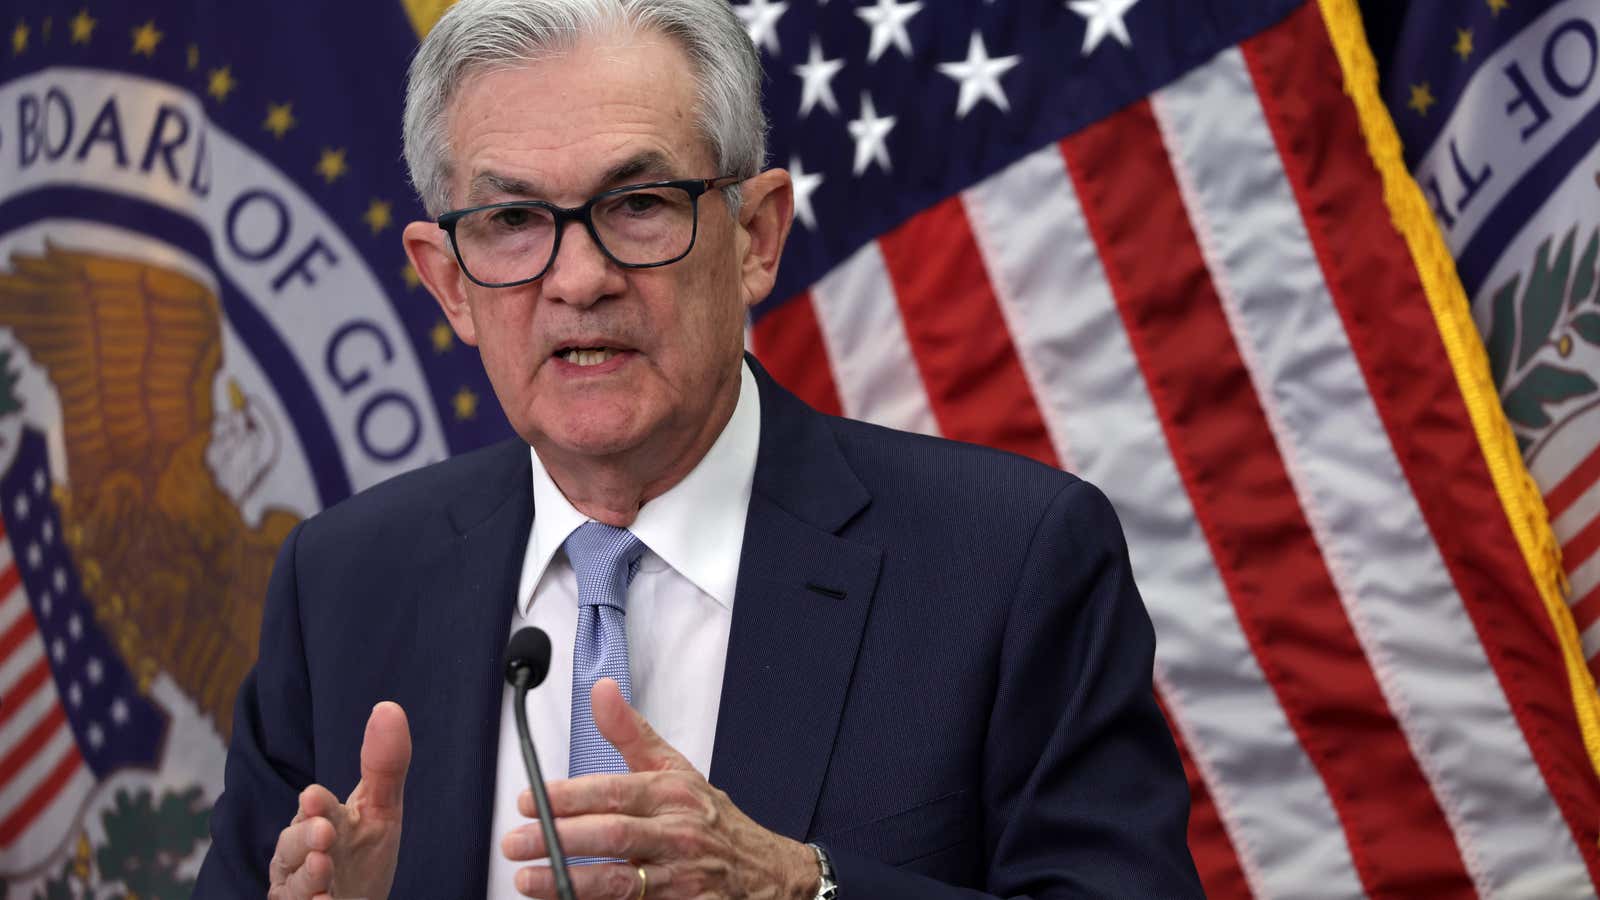 Fed chair Jerome Powell is widely expected to announce an .25% increase in interest rates.